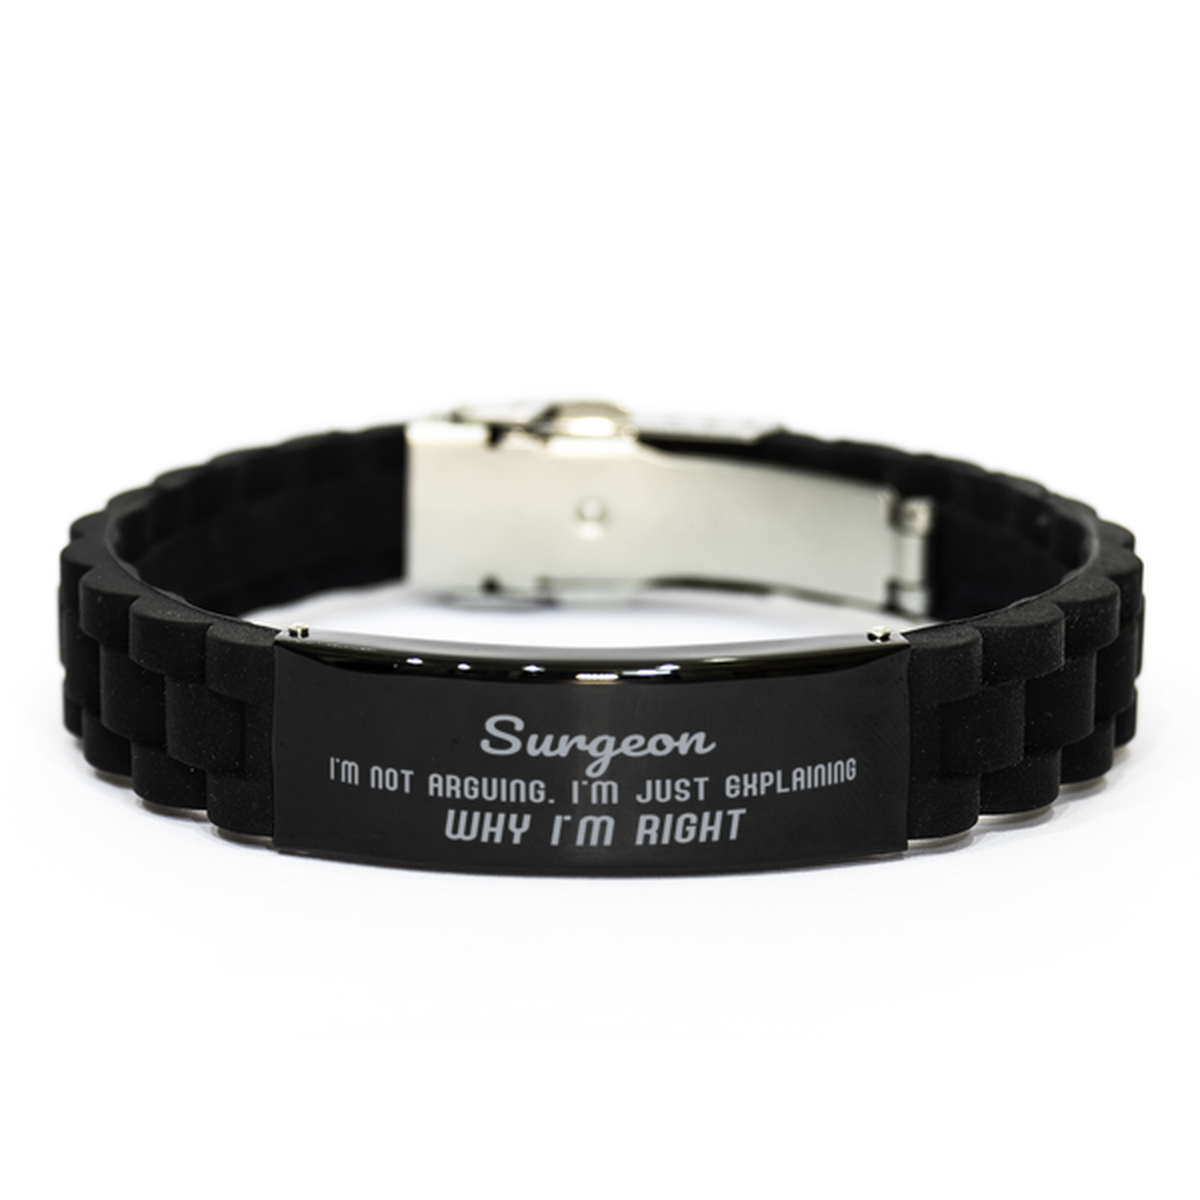 Surgeon I'm not Arguing. I'm Just Explaining Why I'm RIGHT Black Glidelock Clasp Bracelet, Funny Saying Quote Surgeon Gifts For Surgeon Graduation Birthday Christmas Gifts for Men Women Coworker